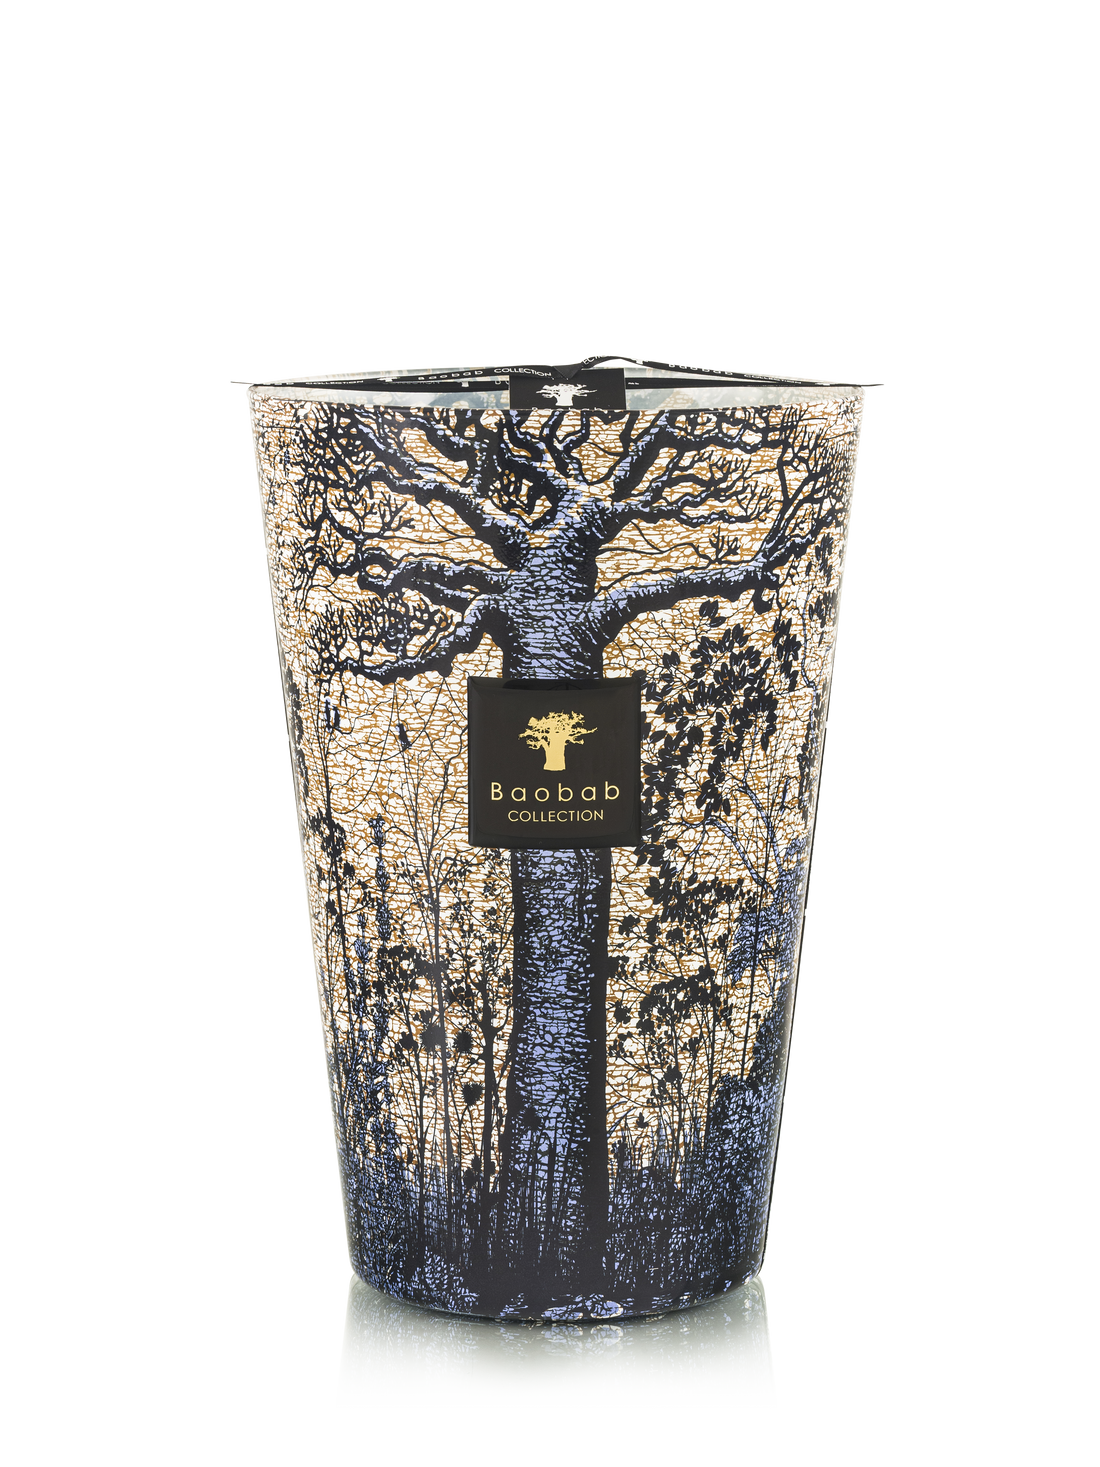 SCENTED CANDLE SACRED TREES SEGUELA - Baobab Collection